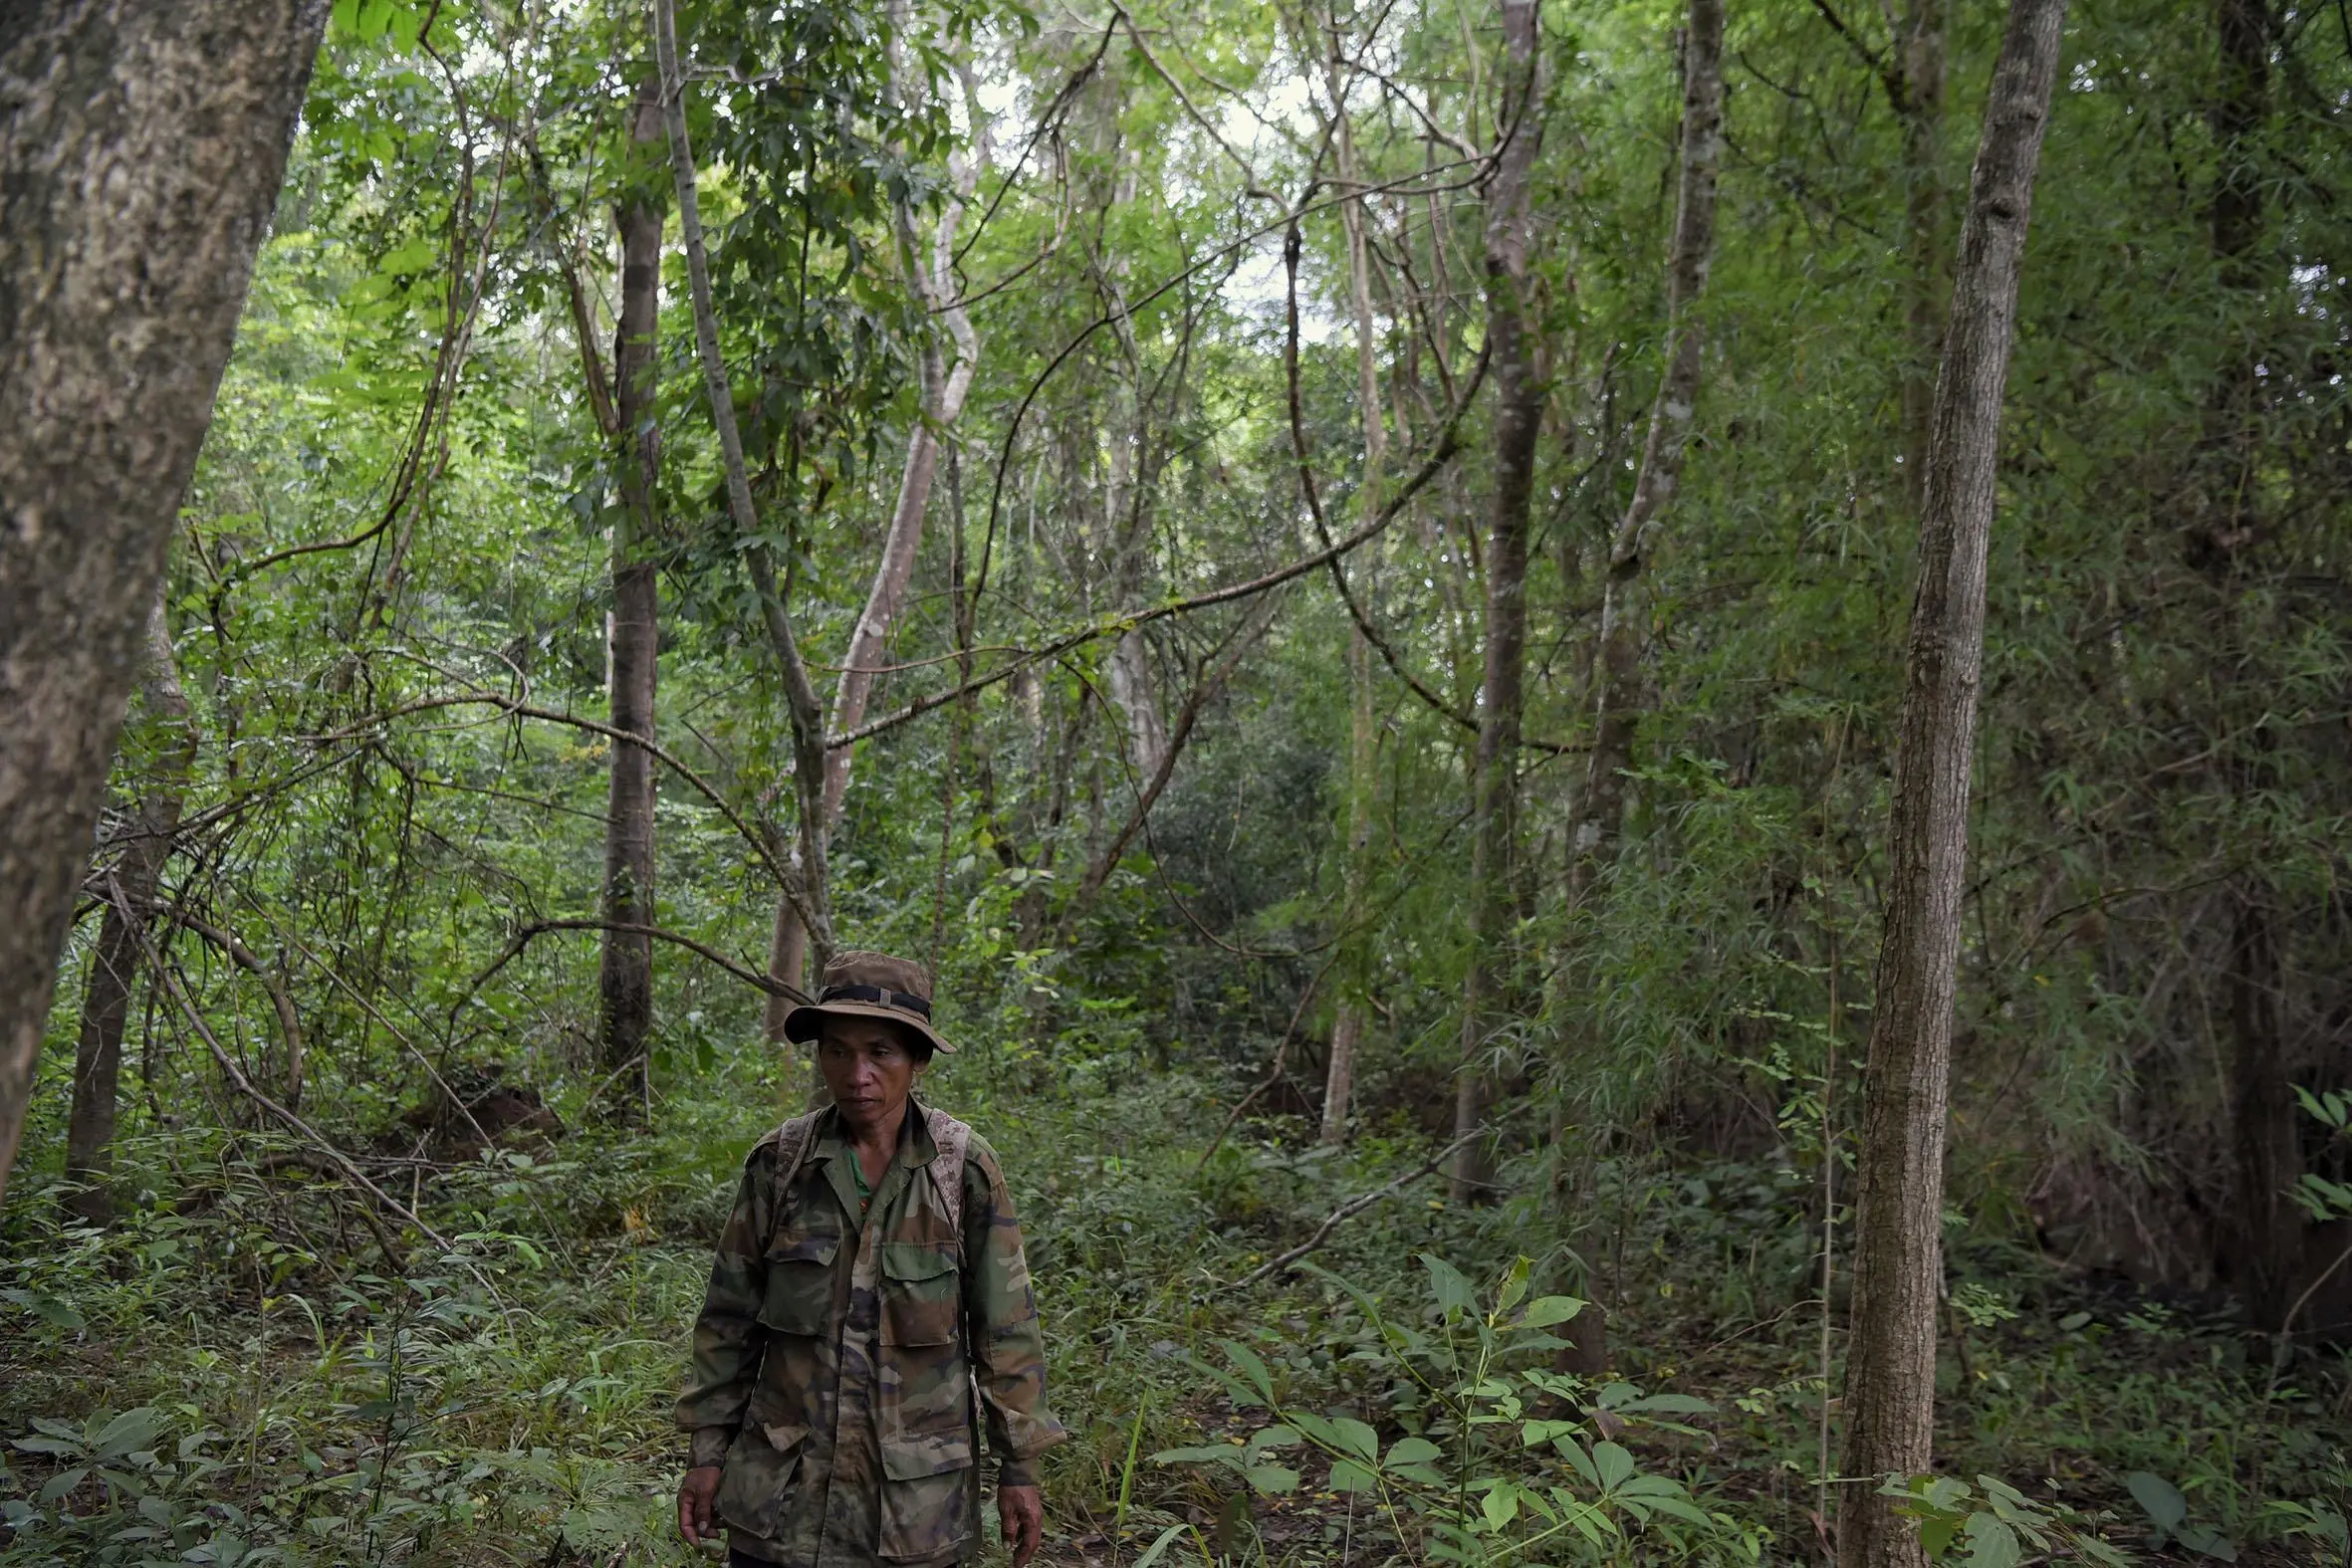 A man in camouflage stands in the forest.